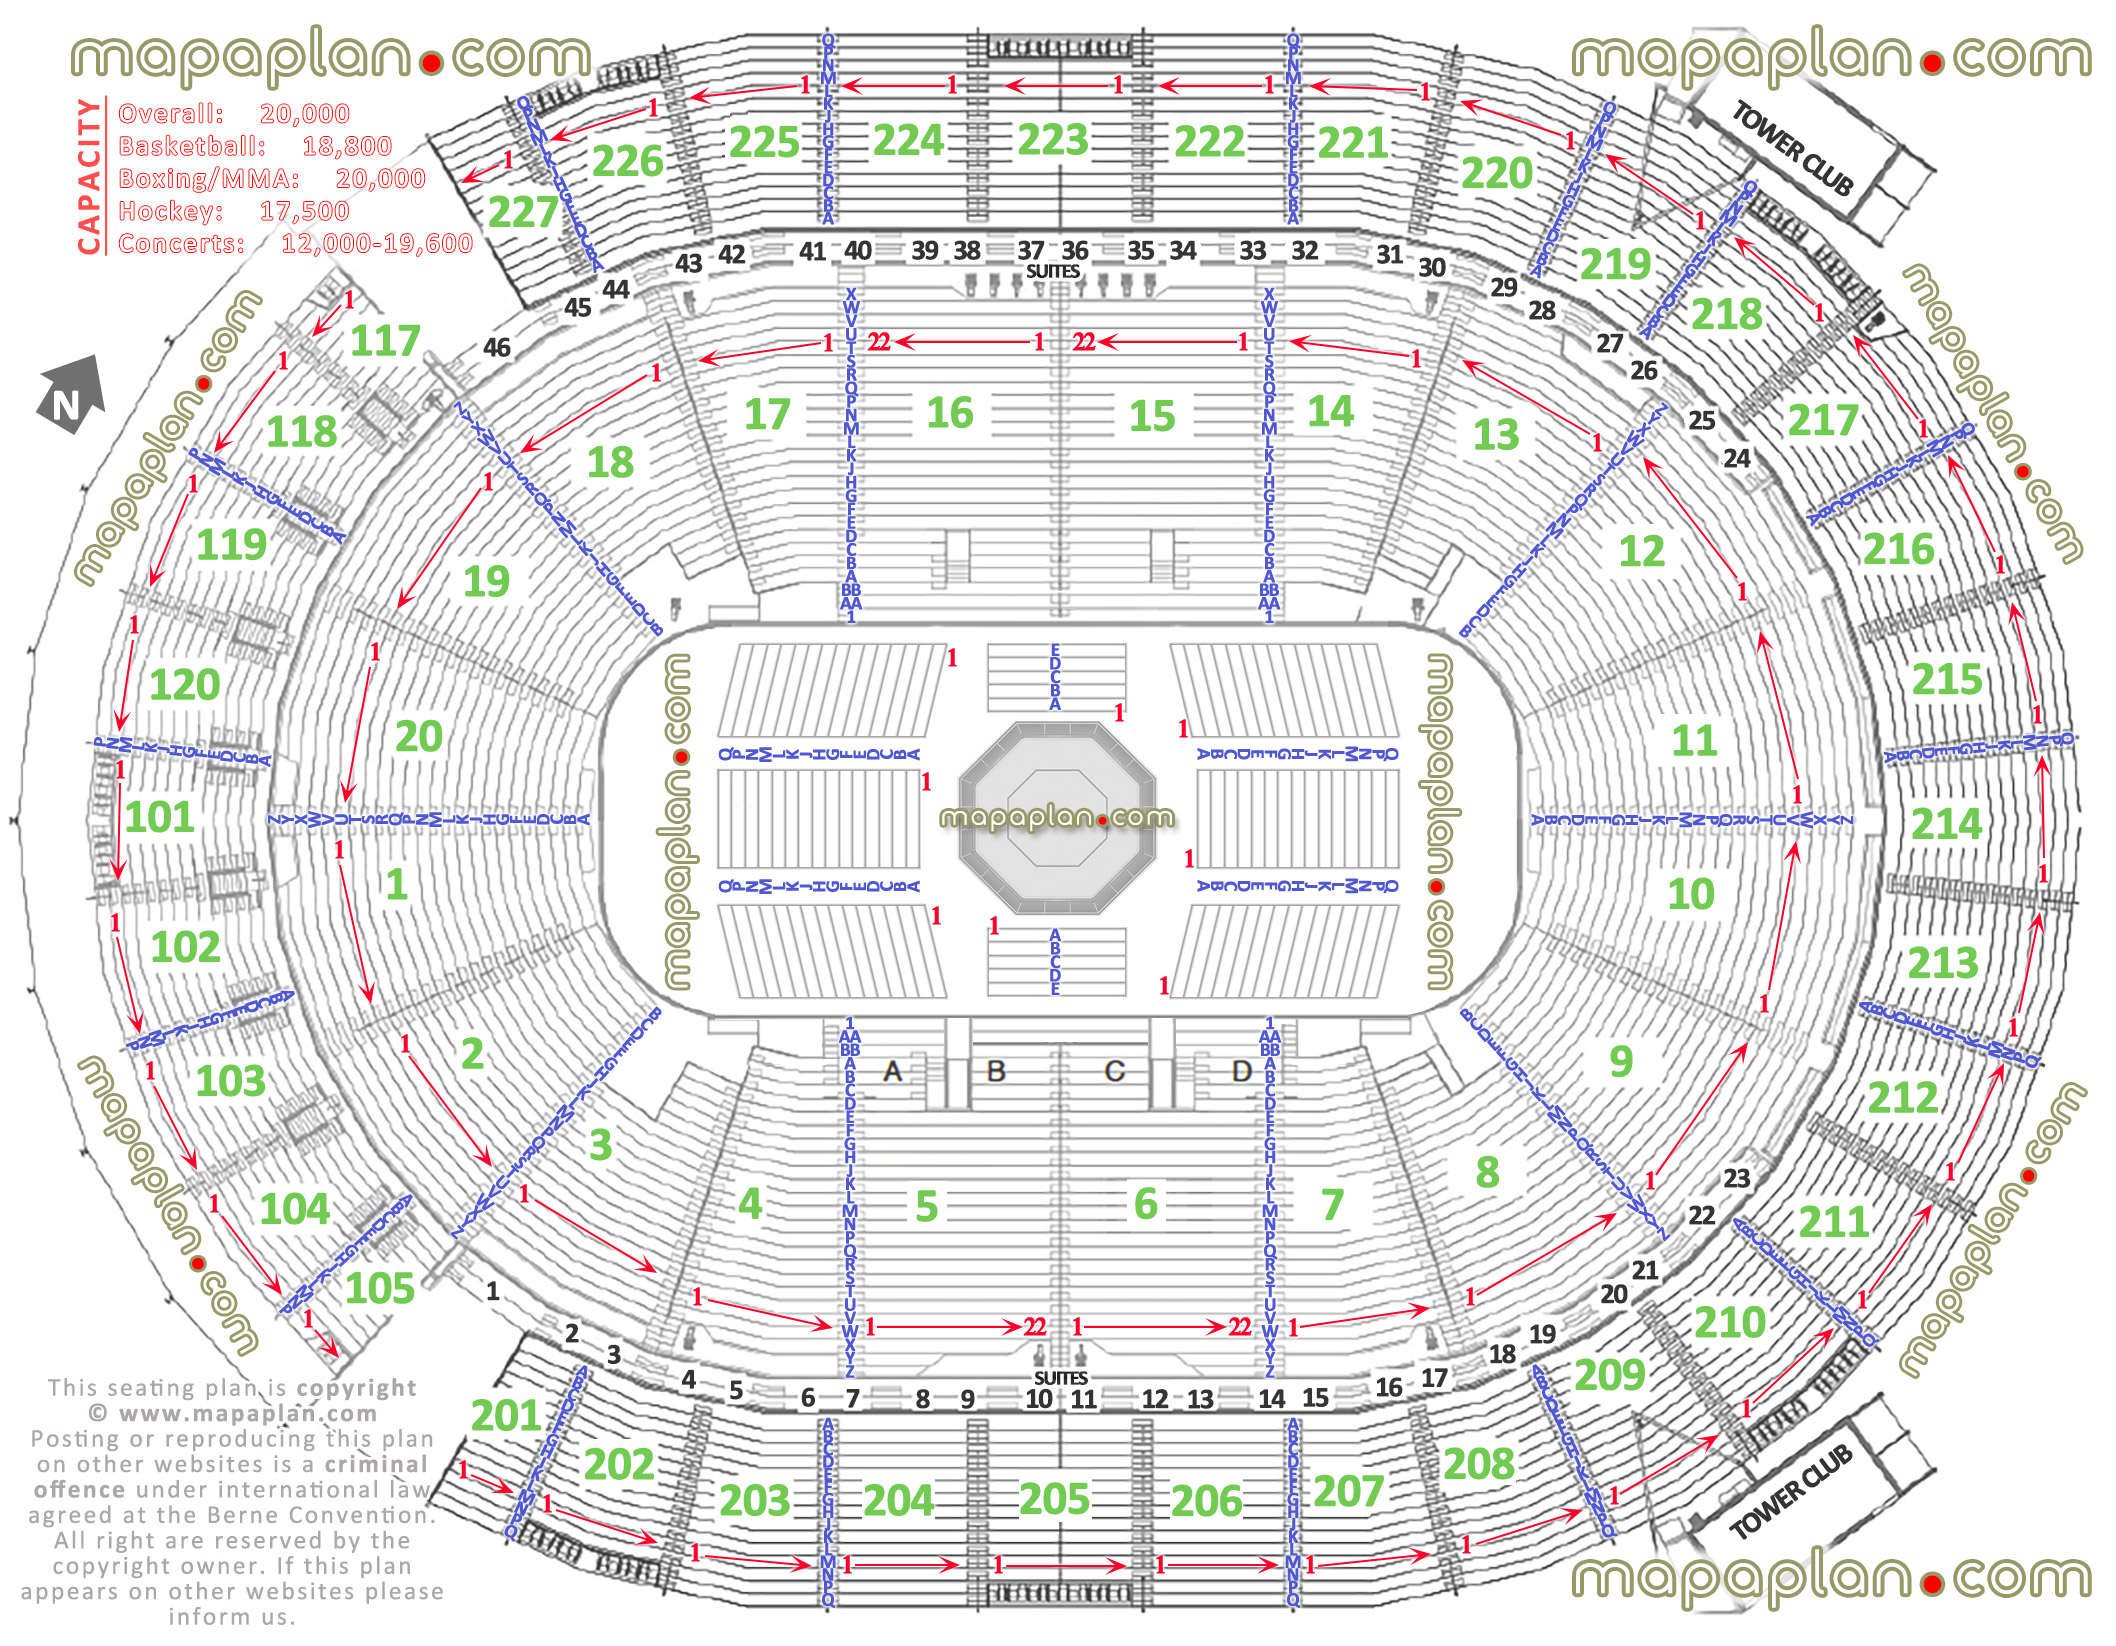 ufc 200 detailed seating chart row max seat capacity numbers rows each section detailed plan mma fights nevada lower suites upper tower club levels sections 1 2 3 4 5 6 7 8 9 10 11 12 13 14 15 16 17 18 19 20 Las Vegas T-Mobile Arena Las Vegas T-Mobile Arena seating chart